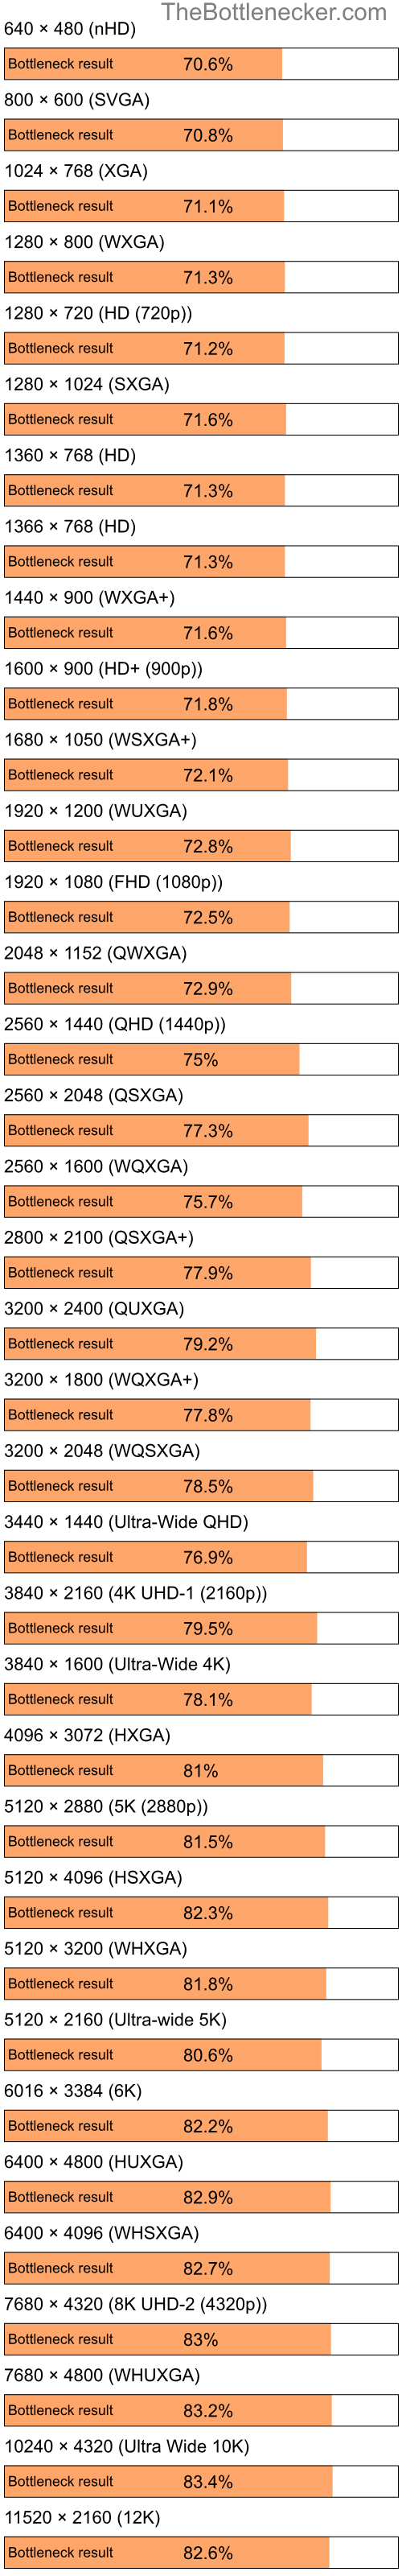 Bottleneck results by resolution for Intel Celeron and AMD Radeon X800GT in Graphic Card Intense Tasks